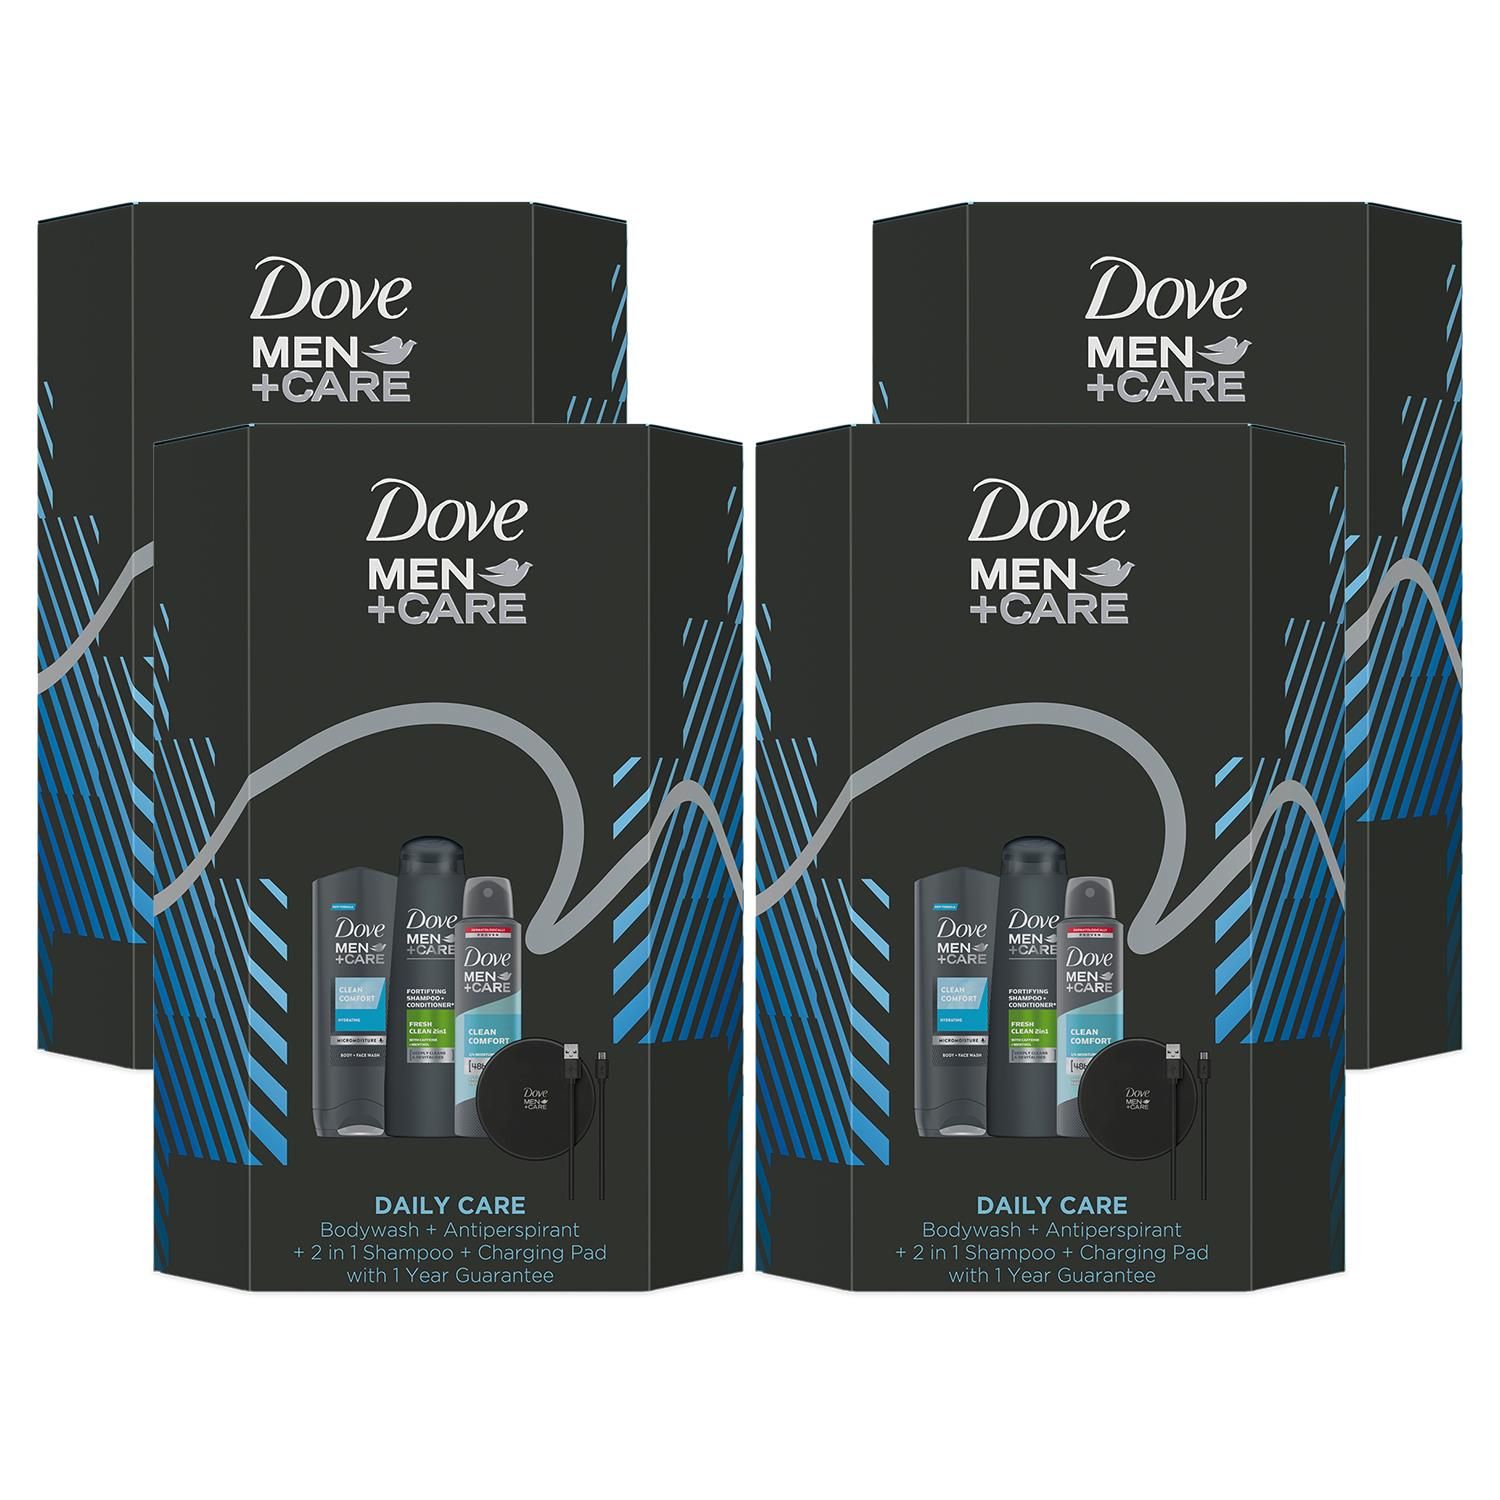 Dove Men Care Bodywash Shampoo & Deo 3pcs Gift Set For Men with Charging Pad 4pk

Body + Face Wash 250ml: Dove Men+Care Clean Comfort Body and Face Wash, with MicroMoisture technology, hydrates your skin to leave it healthy and protected against dryness. This highly effective formula rinses off easily to deliver a refreshing clean and total skin comfort. Dove Men+Care Clean Comfort Body Wash uses unique MicroMoisture technology, which activates lathering, helping to lock in your skin's natural moisture and leaving skin feeling hydrated.

Shampoo + Conditioner 250ml: Dove Men+Care Fresh & Clean Fortifying 2-in-1 Shampoo and Conditioner provides a deep, refreshing clean. Enriched with caffeine and menthol, this 2-in-1 shampoo for men washes away dirt and grease, with an energizing and refreshing effect. The product is specially engineered for men to provide a deep clean that leaves hair visibly stronger and more resilient.

Antiperspirant 150ml: Antiperspirant that can keep up with your busy schedule. If you want to stop sweat from dominating your day, try Dove Men+Care Clean Comfort Antiperspirant Aerosol. Engineered specifically for men, this antiperspirant deodorant delivers 48 hours of powerful odour and sweat protection to help you stay fresh all day.

Charging Pad: This gift set features a Dove Men+Care Charging Pad* compatible with wireless charging devices and provides 10W fast charging capability. The perfect gift for any occasion.

How to Use: 

Face+Body Wash: Squeeze some body wash into your hand. Work it into a lather with wet hands and massage all over your skin.
Anti-Perspirant: Shake well, hold the can 15cm from the underarm, and spray.
Shampoo+Conditioner: Massage Shampoo into wet hair and rinse. follow it with conditioner to massage and rinse.

Gift Set Includes: 
1x Dove Clean Comfort Face & Body Wash 250 ml
1x Dove Fresh Clean Fortifying 2-in-1 Shampoo & Conditioner 250 ml
1x Dove Clean Comfort Antiperspirant Deodorant 150 ml 
1x Wireless Charger